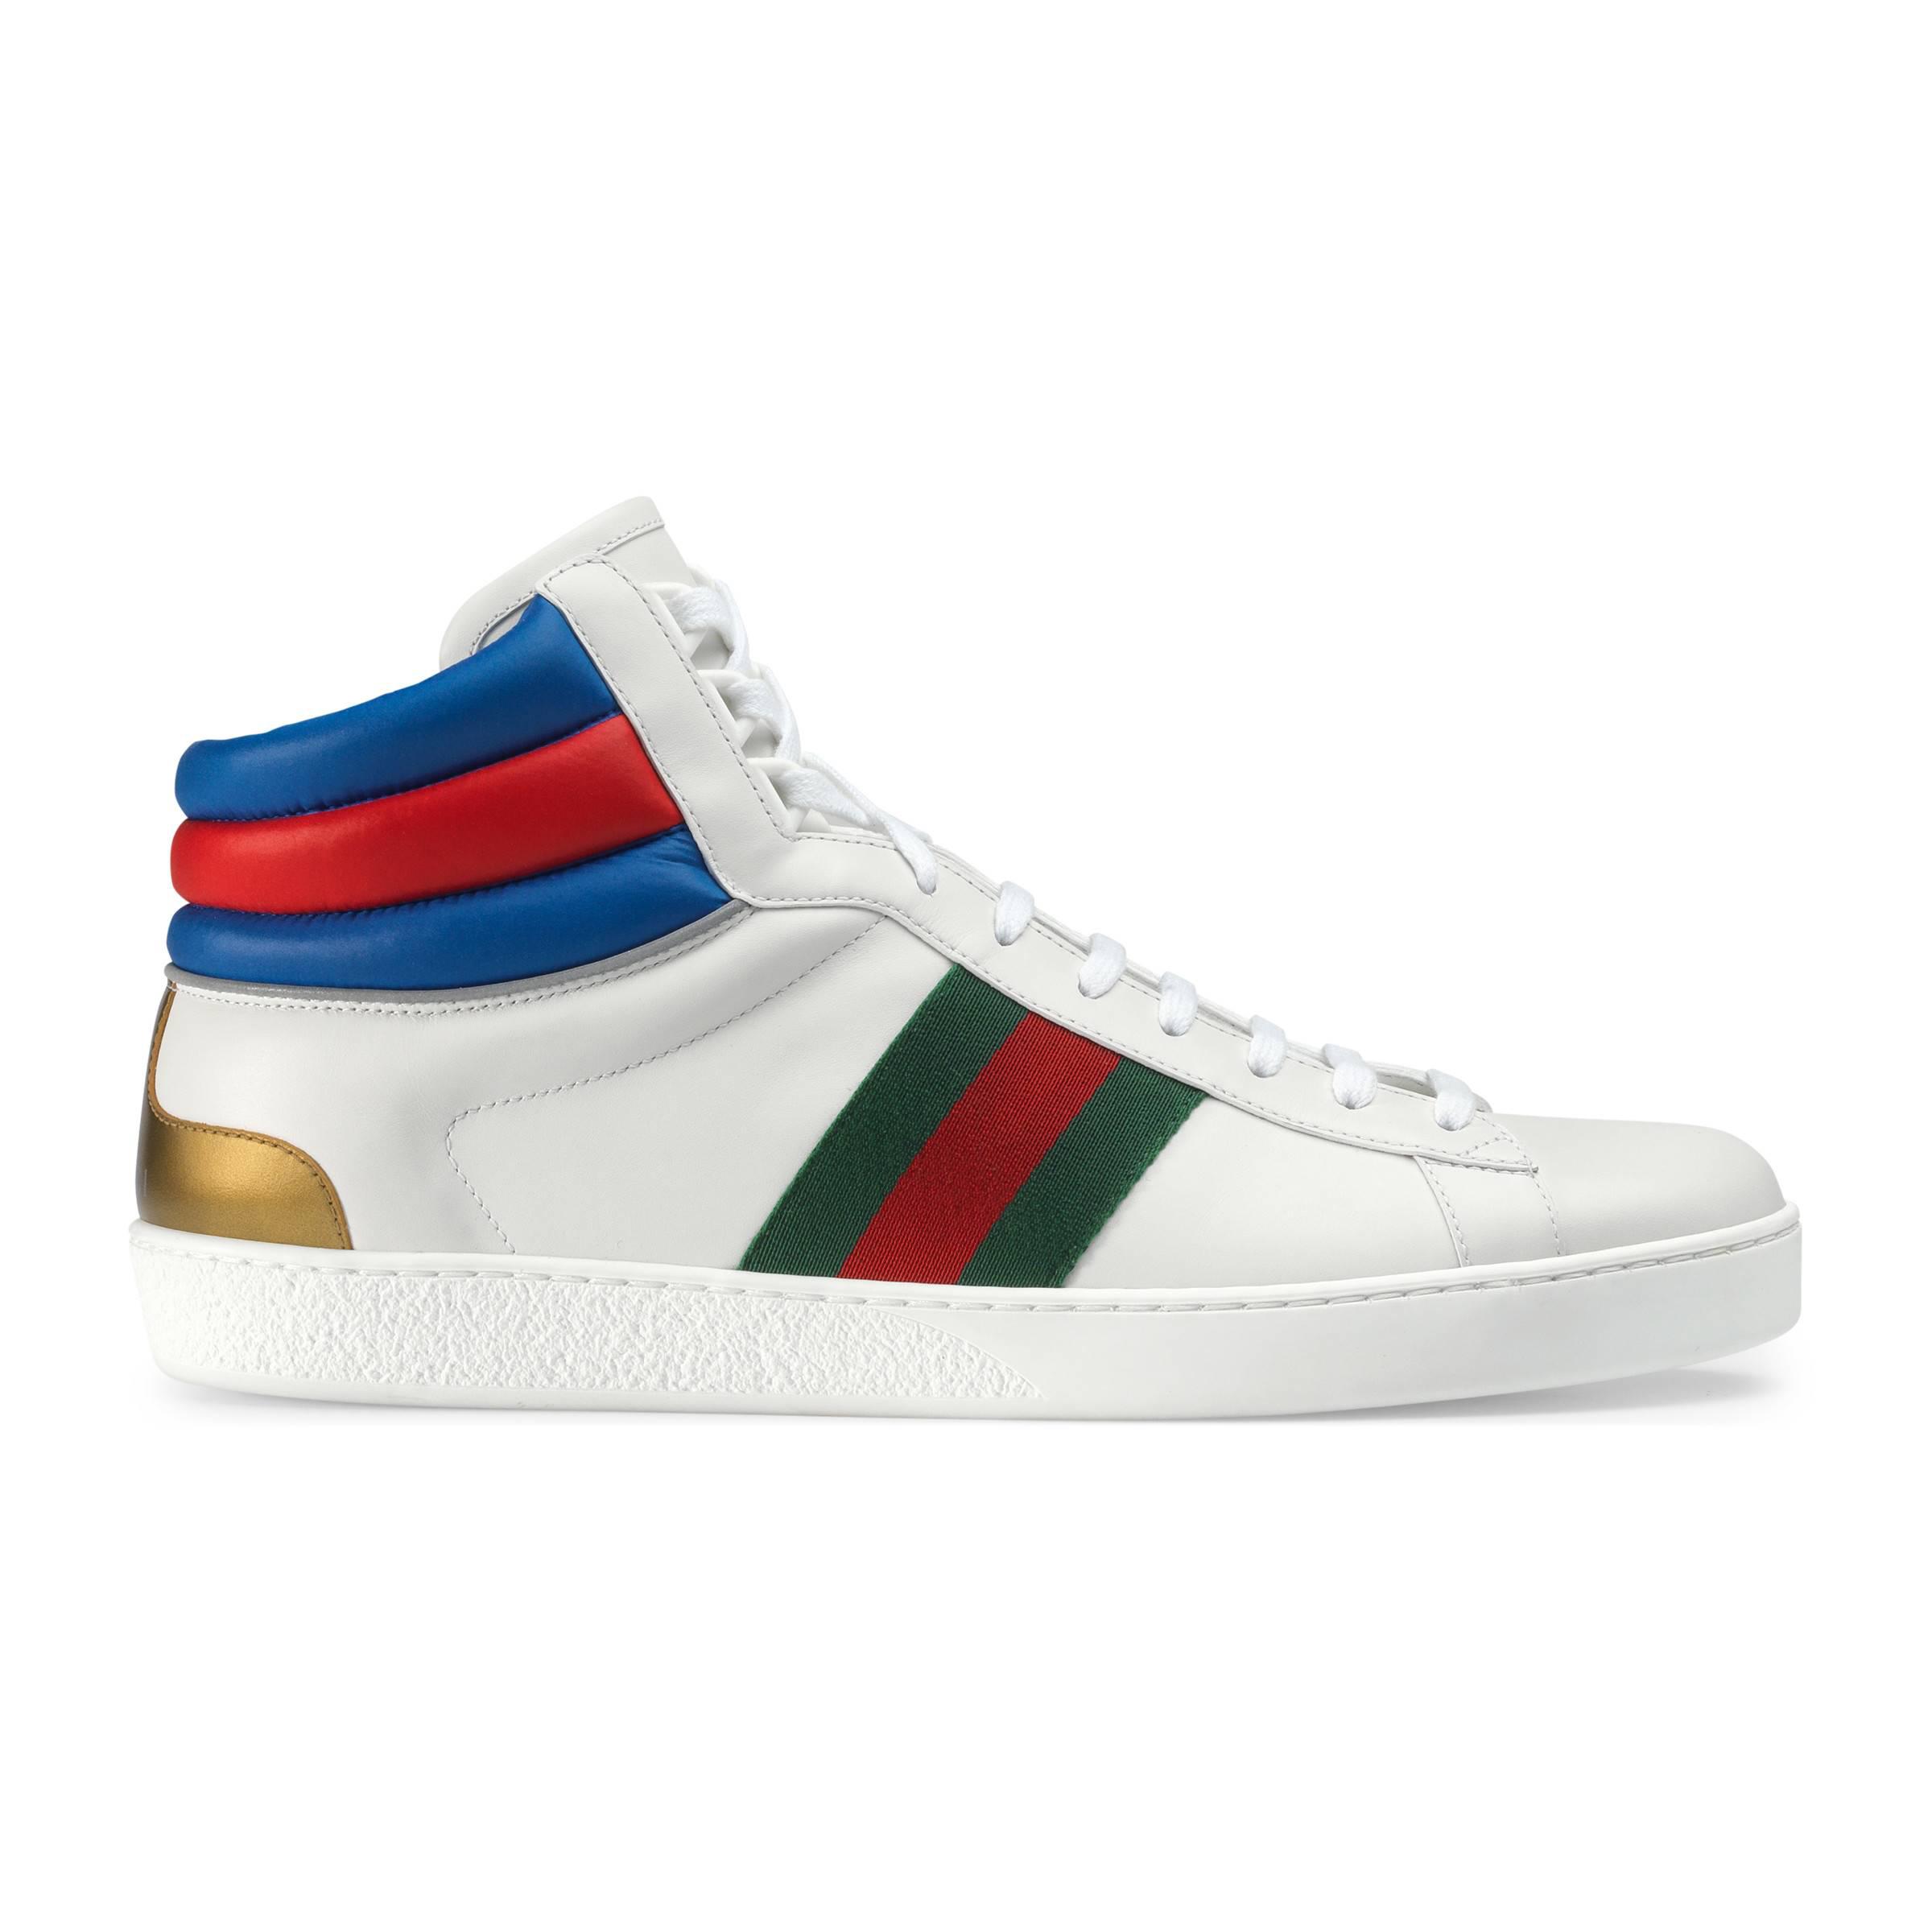 Gucci Ace High-top Sneaker in White for Men - Lyst